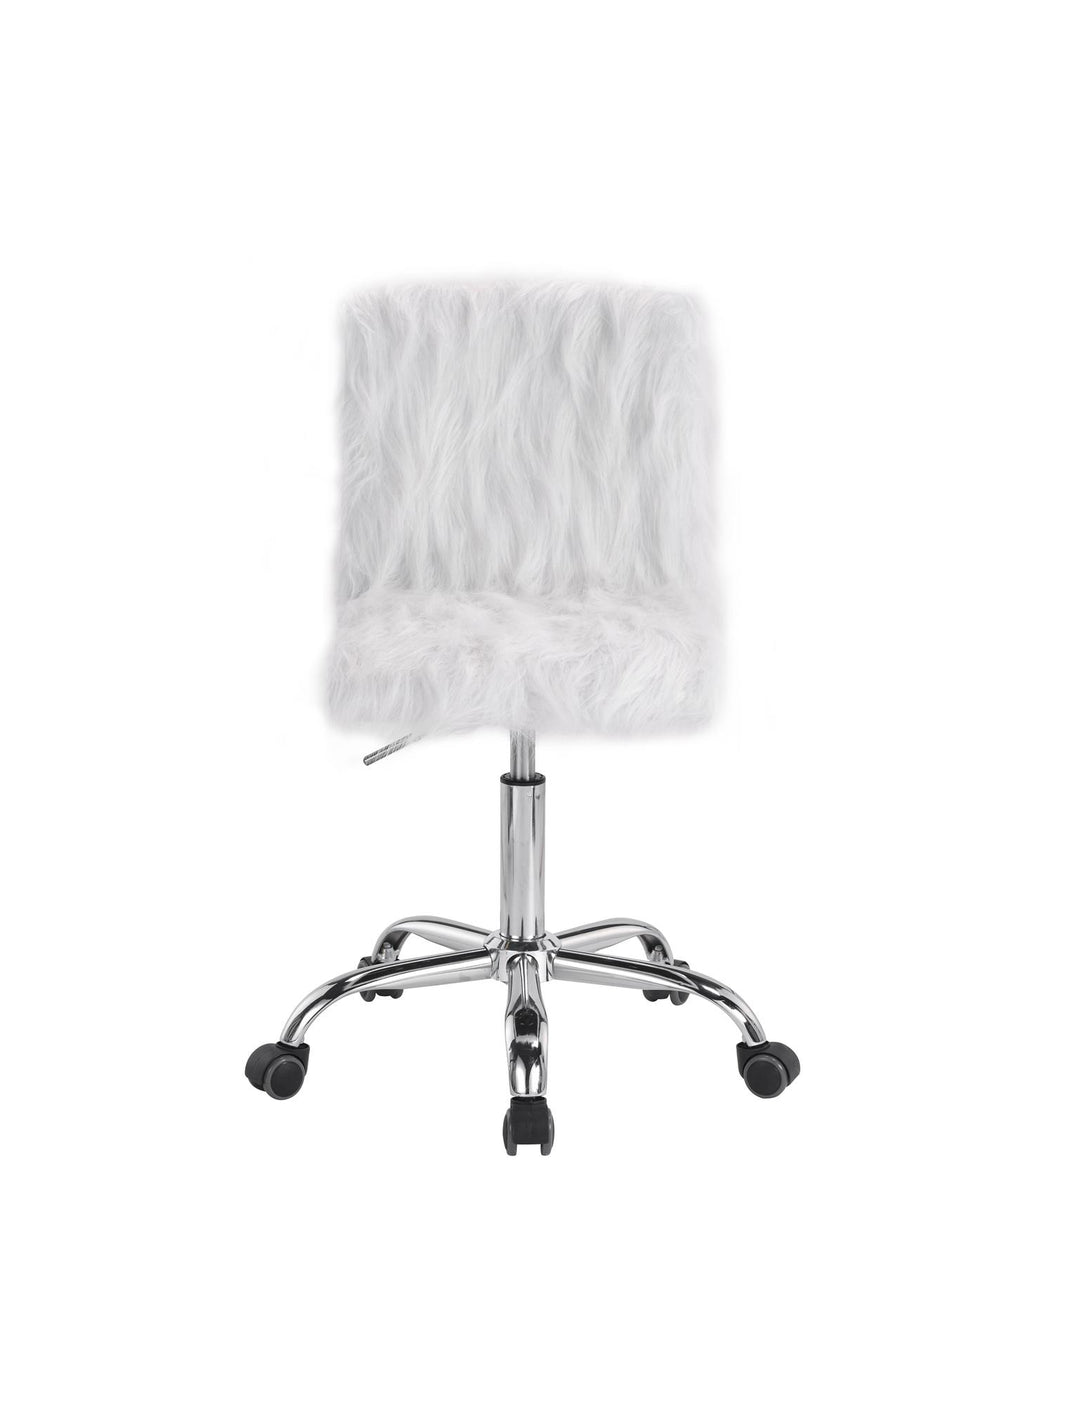 Padded Furry Office Chair - White